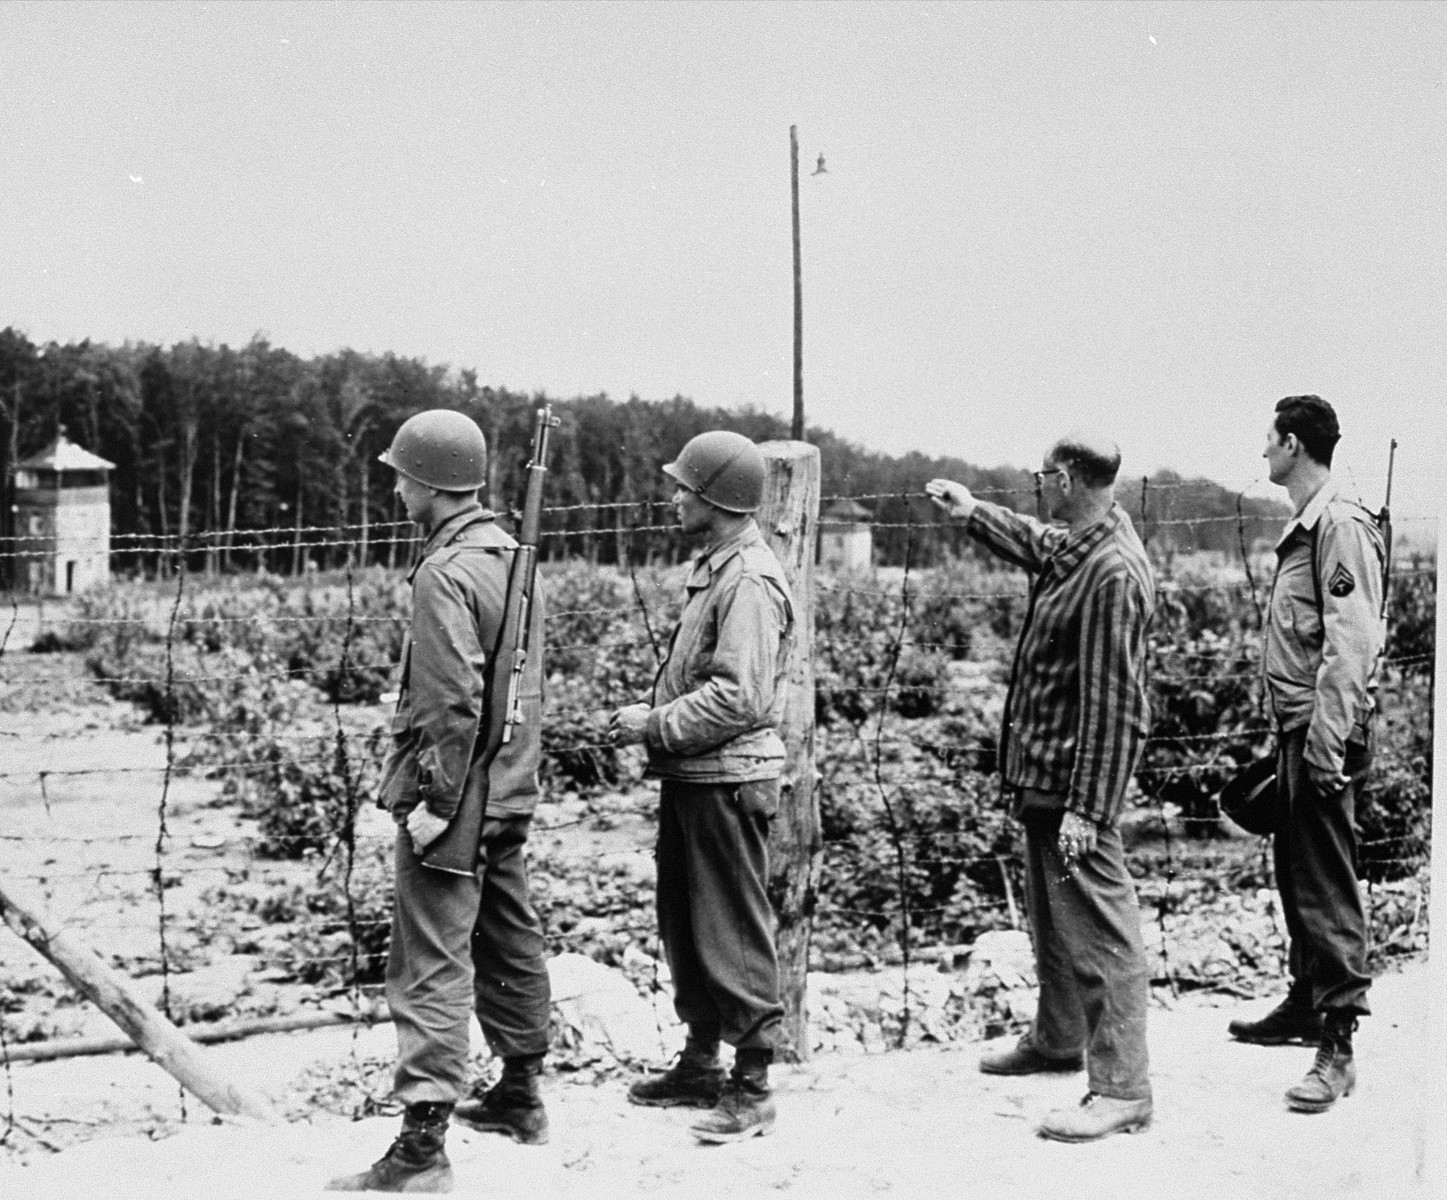 A survivor shows American troops of the 46th Armored Division, U.S. Ninth Army, the watch towers and the electrically charged barbed wire fence in the Buchenwald concentration camp.